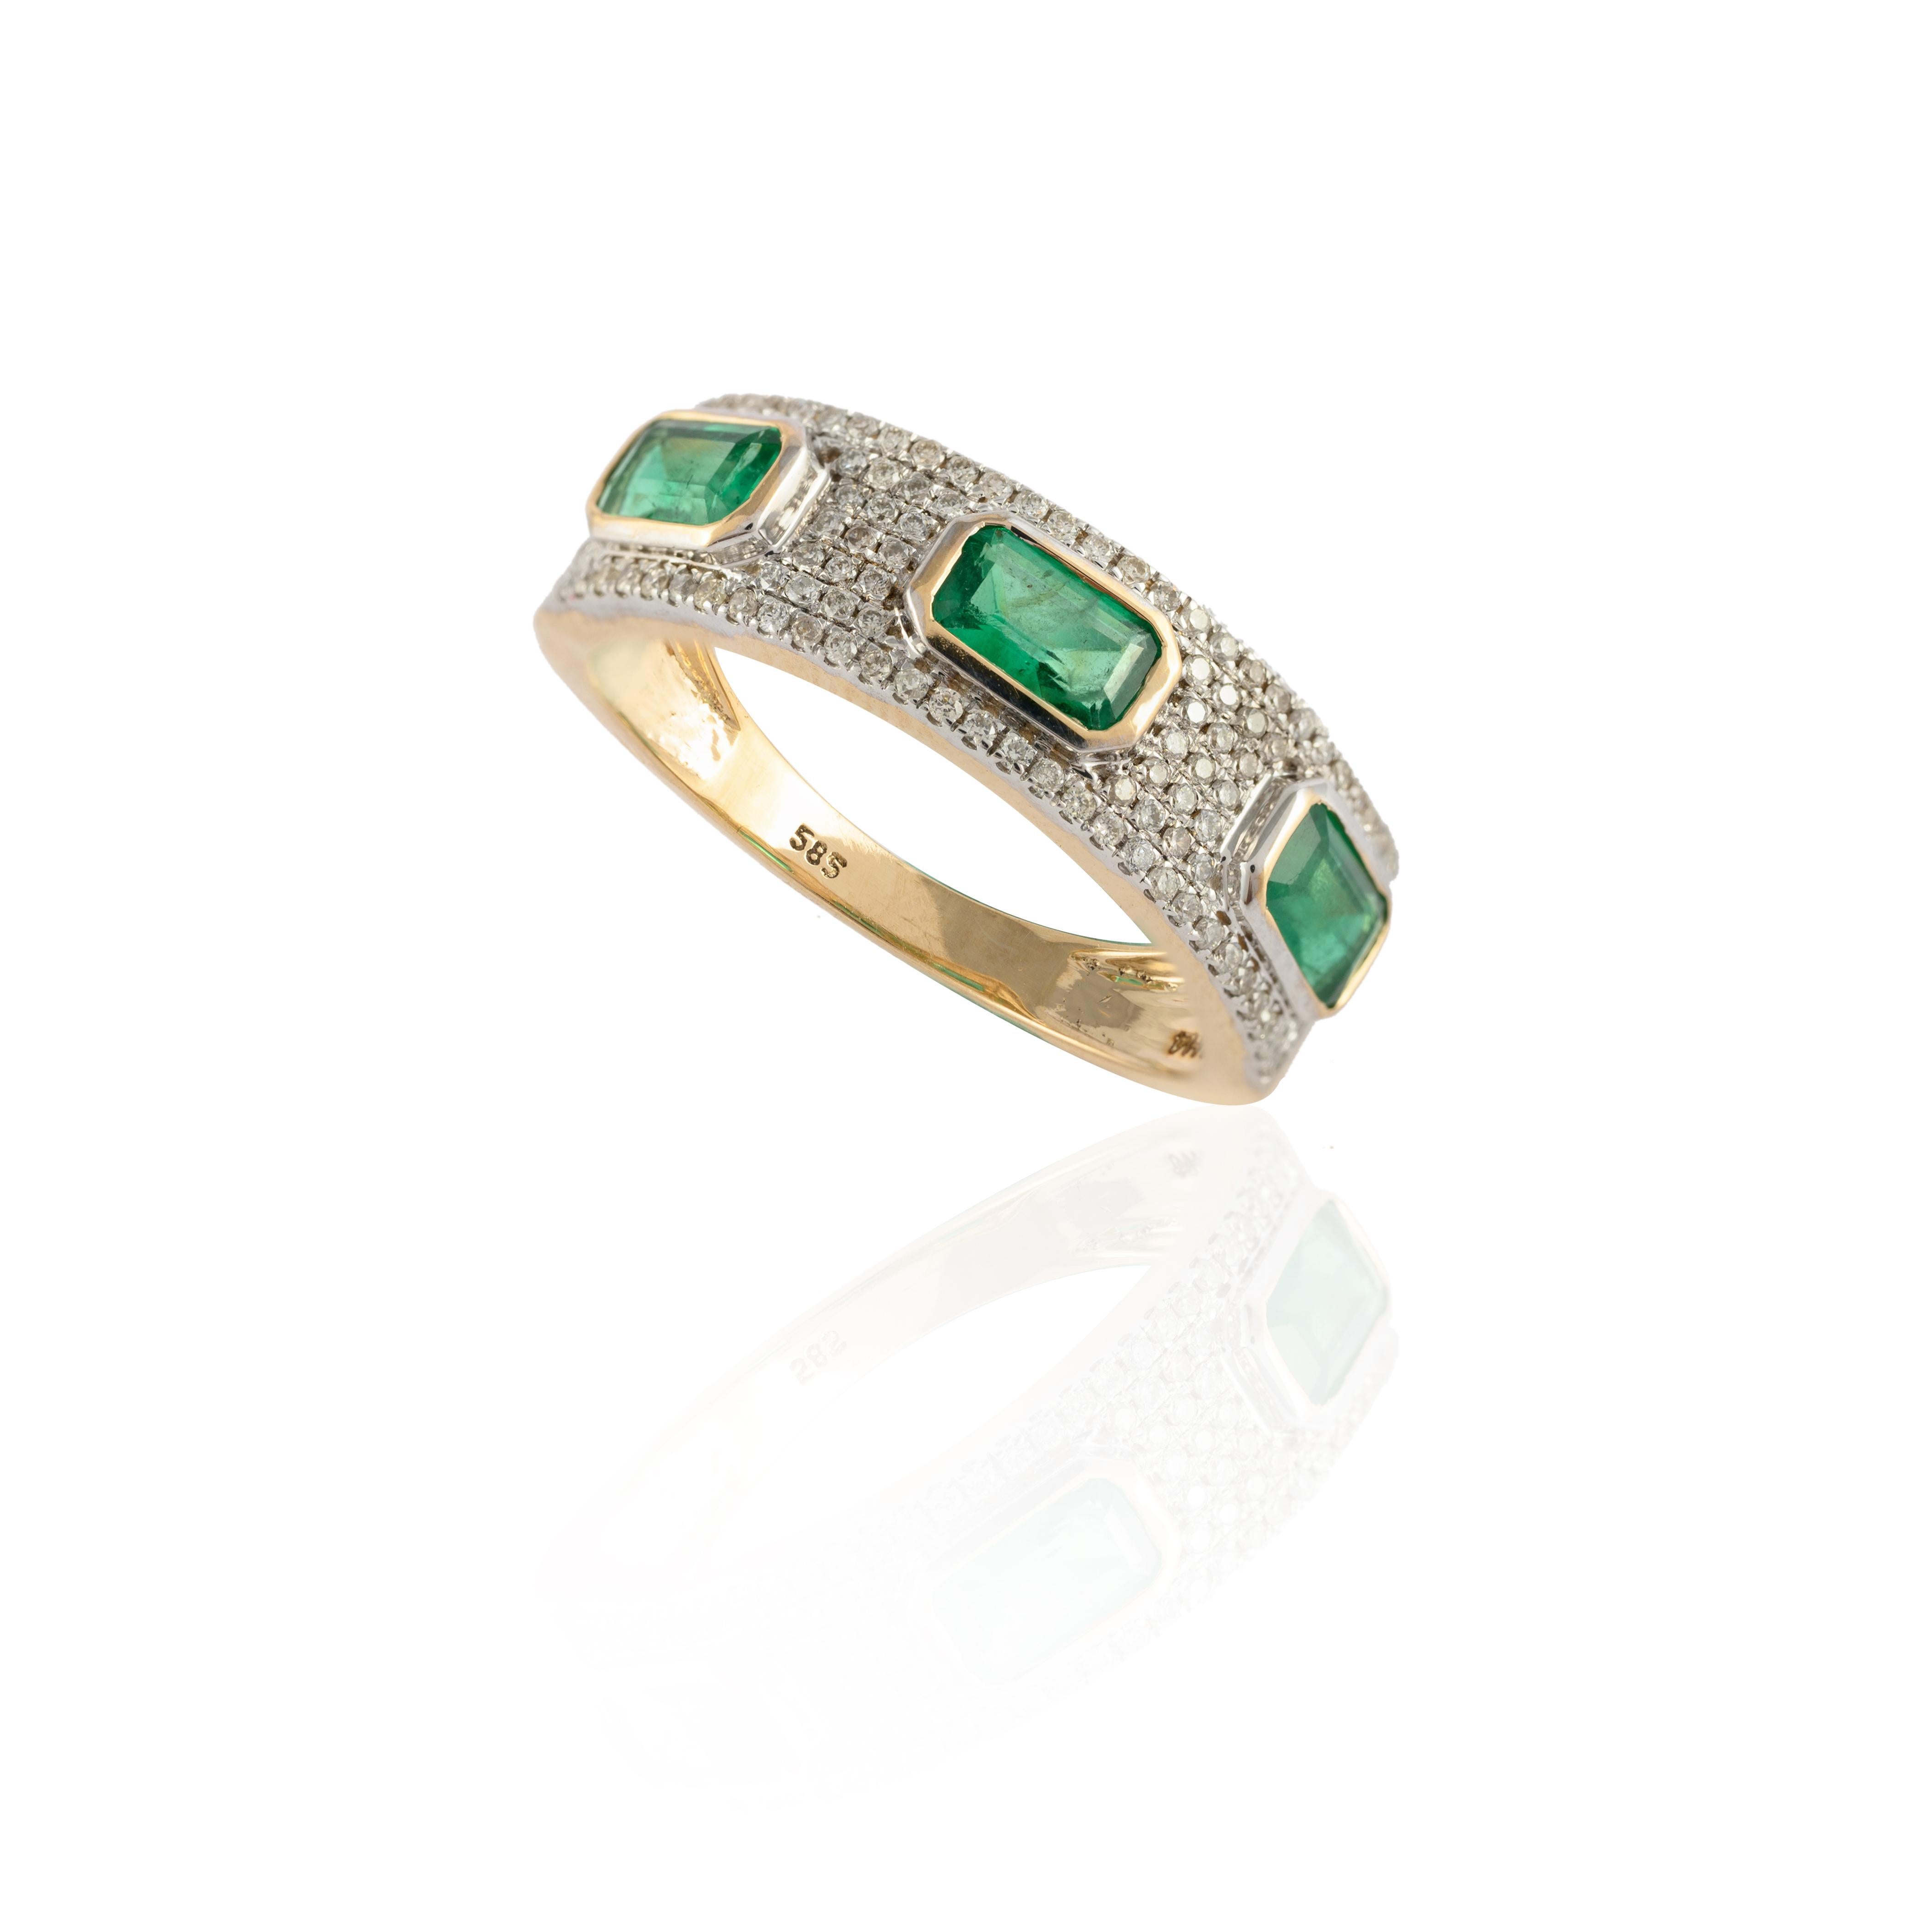 For Sale:  Impeccable 14k Yellow Gold Three Stone Emerald and Diamond Engagement Ring 5